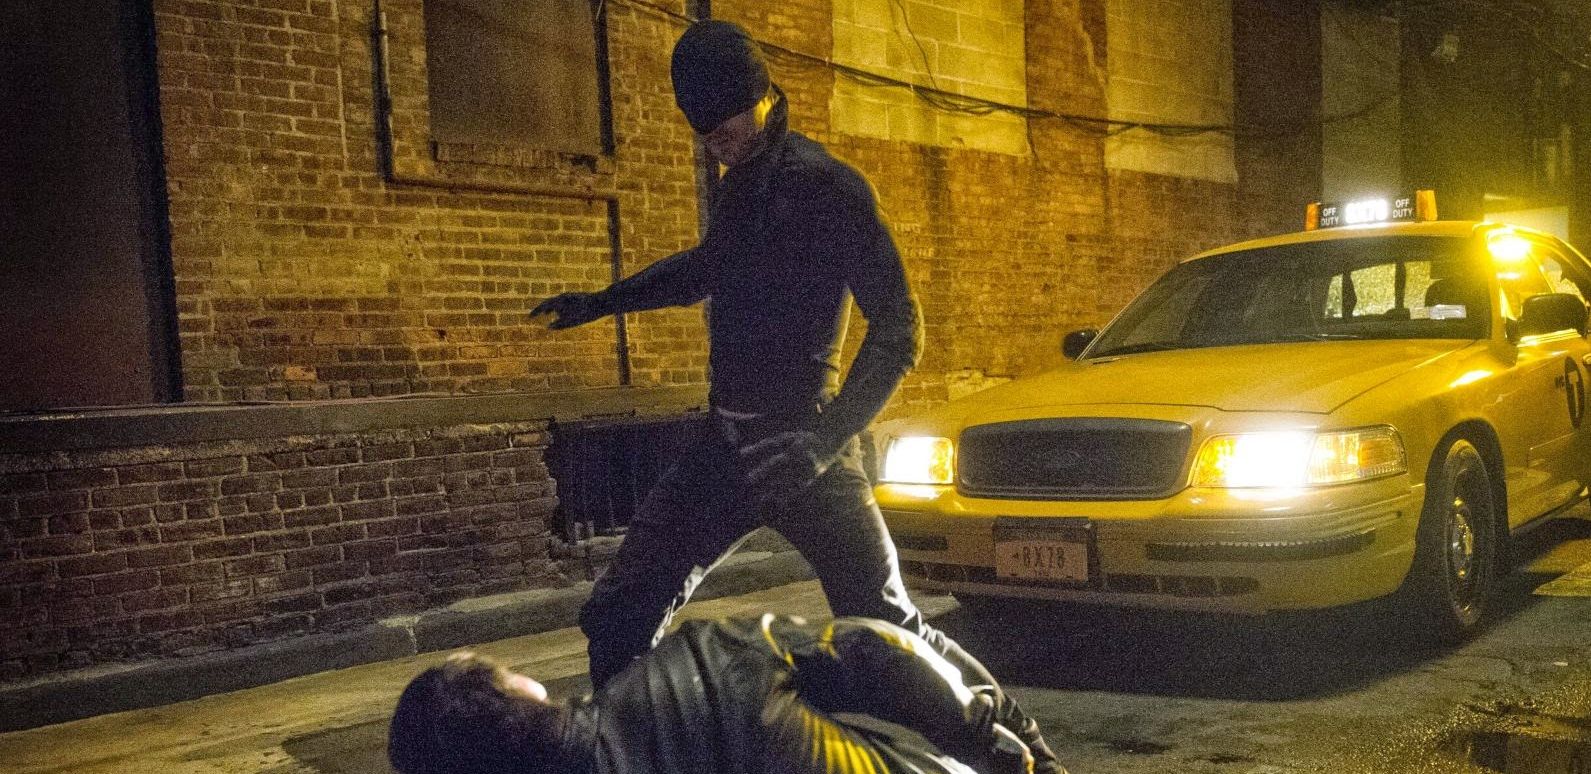 Daredevil fights without suit